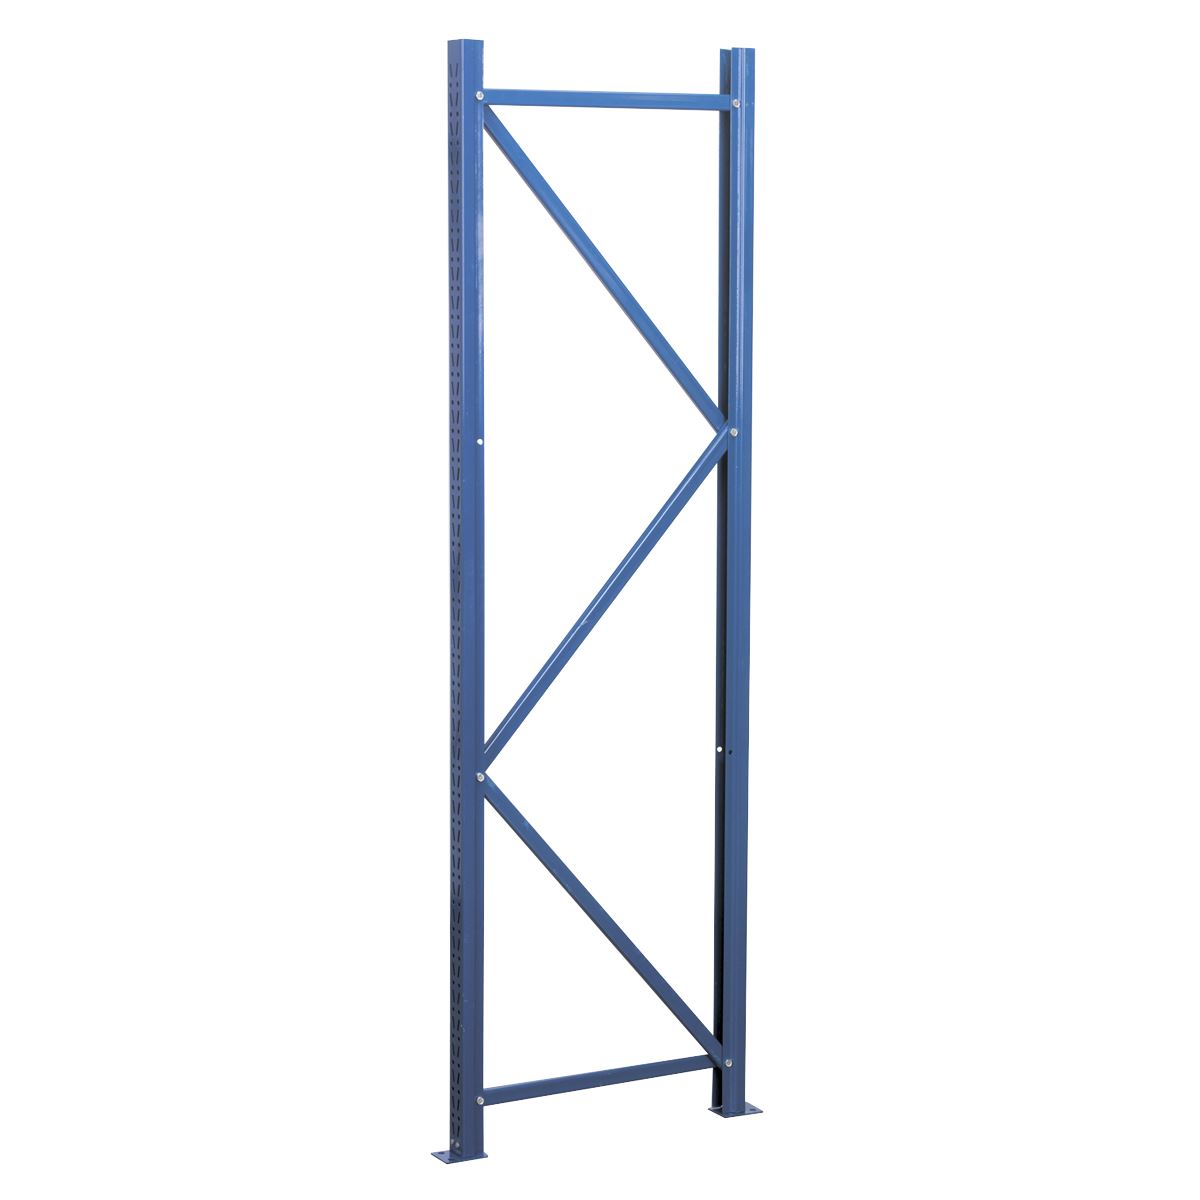 Sealey Frame 2000 x 600mm One End